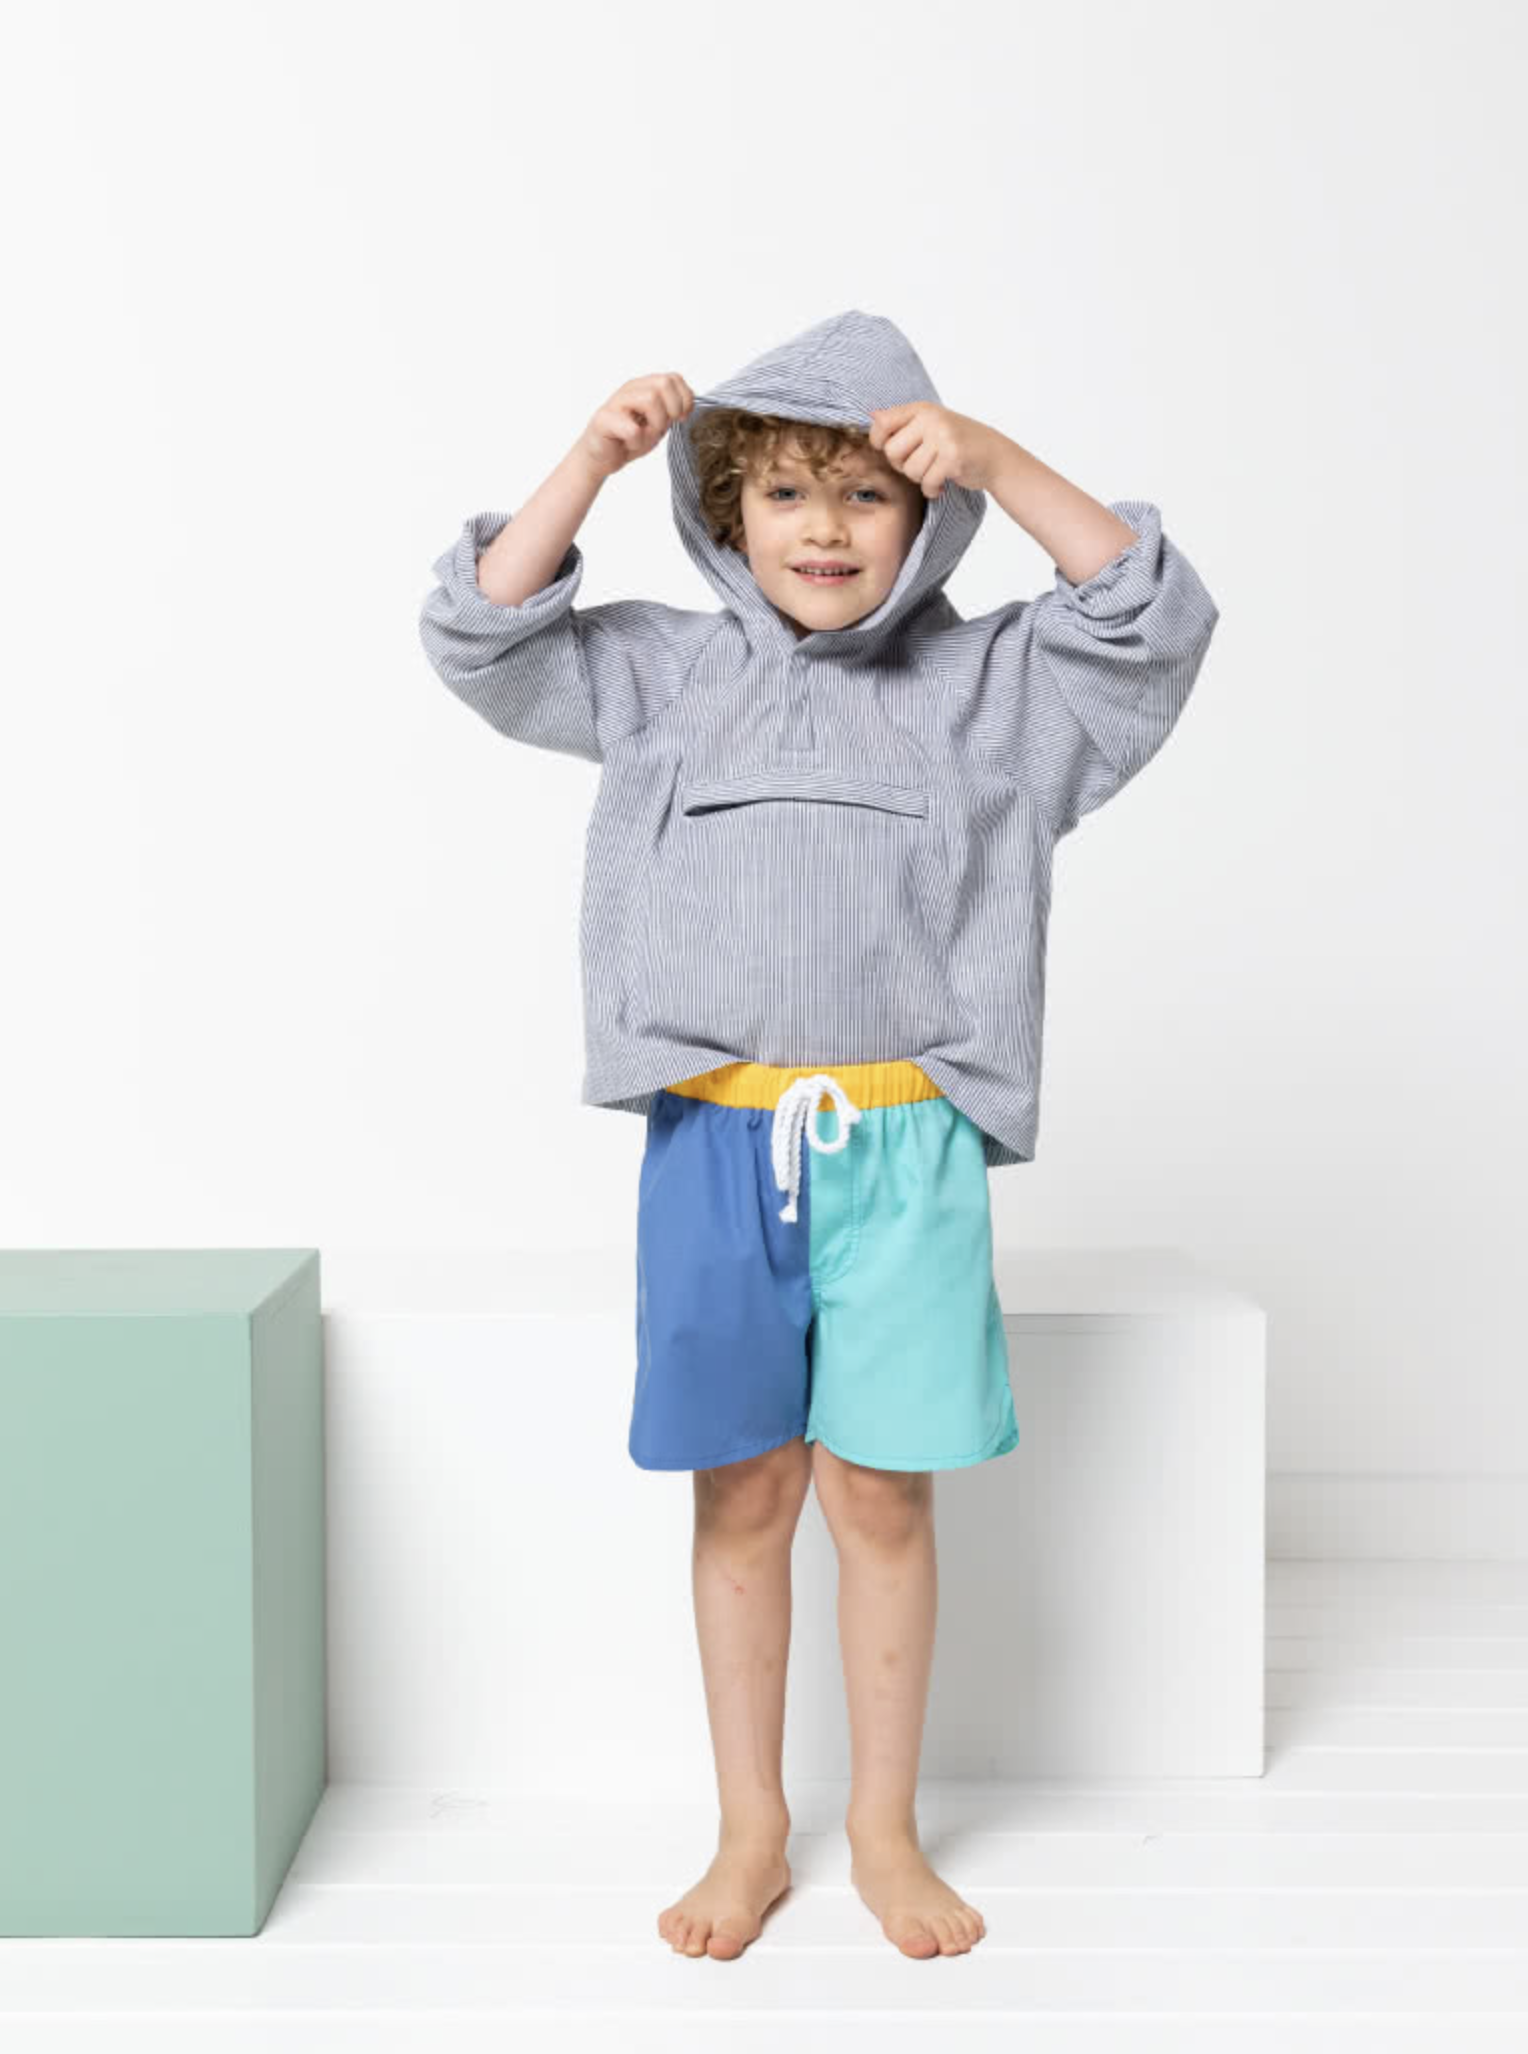 Child wearing the Children's Ash Anorak sewing pattern from Style Arc on The Fold Line. An Anorak pattern made in showerproof nylon fabric, cotton, or polyester fabrics, featuring a hip-length, unlined hood, raglan sleeves, elasticated cuffs, front neck tab snaps and centre front zip pocket.